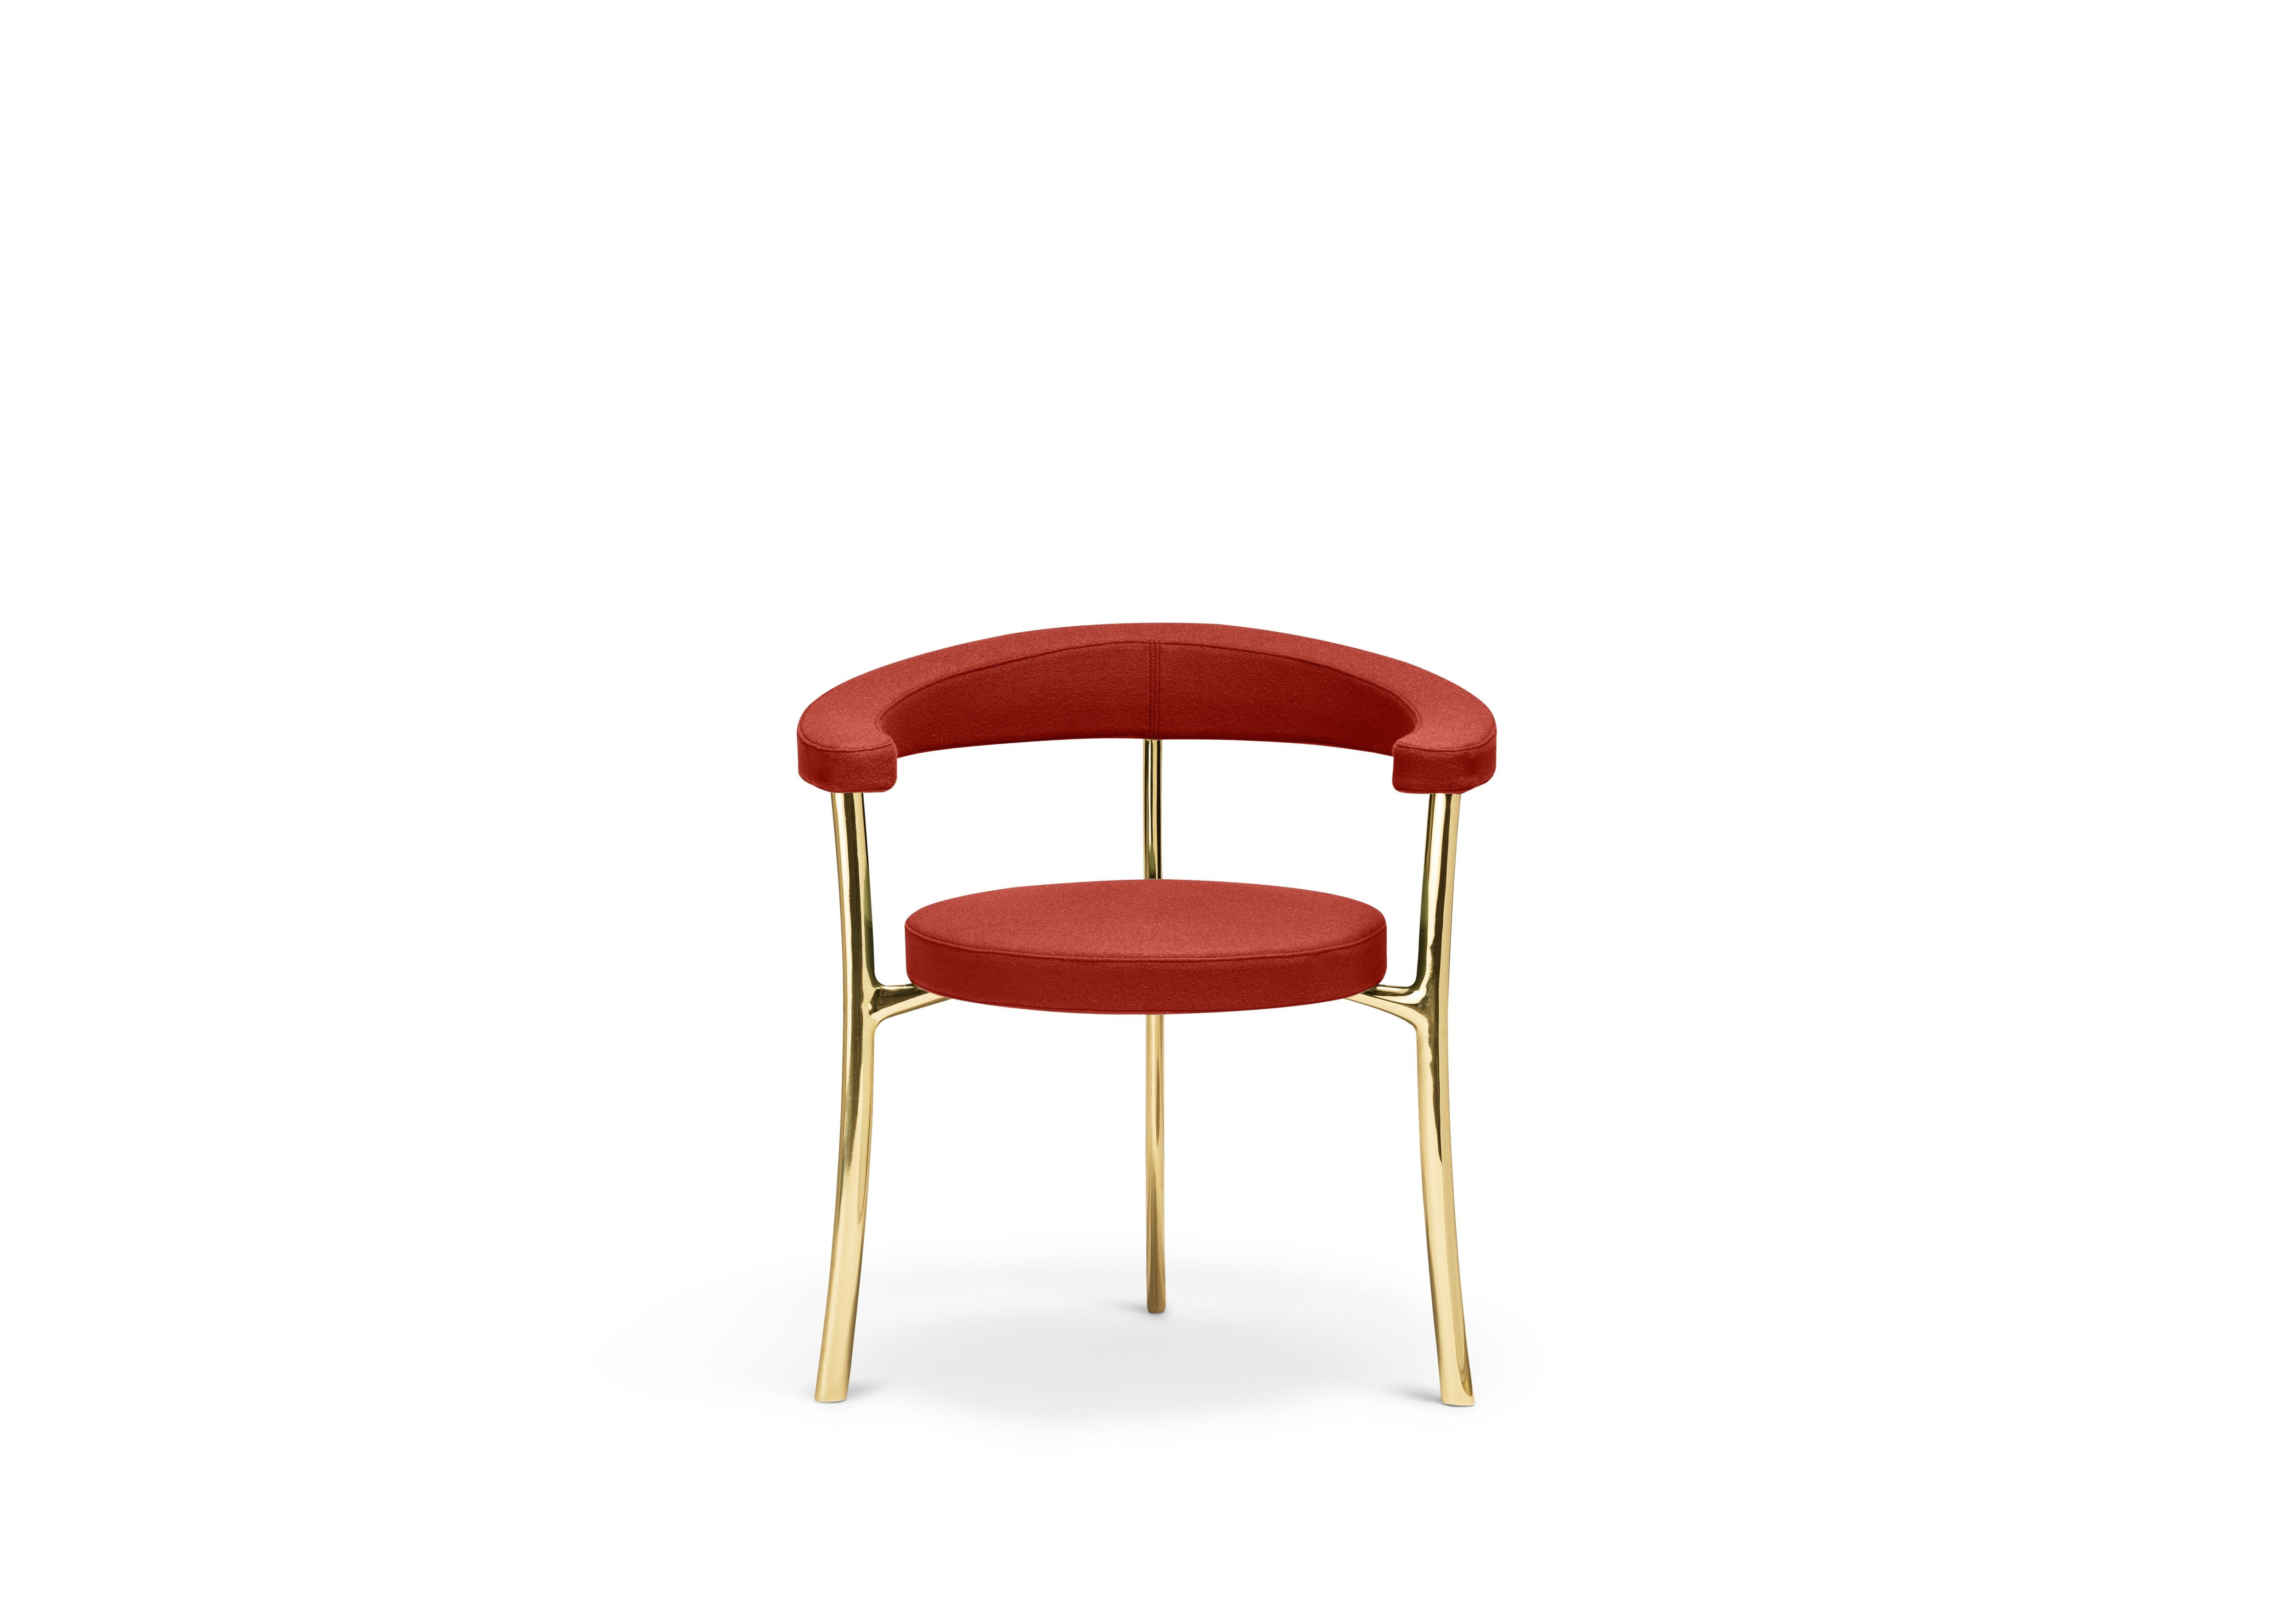 For Sale: Orange (f-1241-c0551) Ghidini1961 Katana Armchair in Fabric with Polished Brass Legs by Paolo Rizzatto